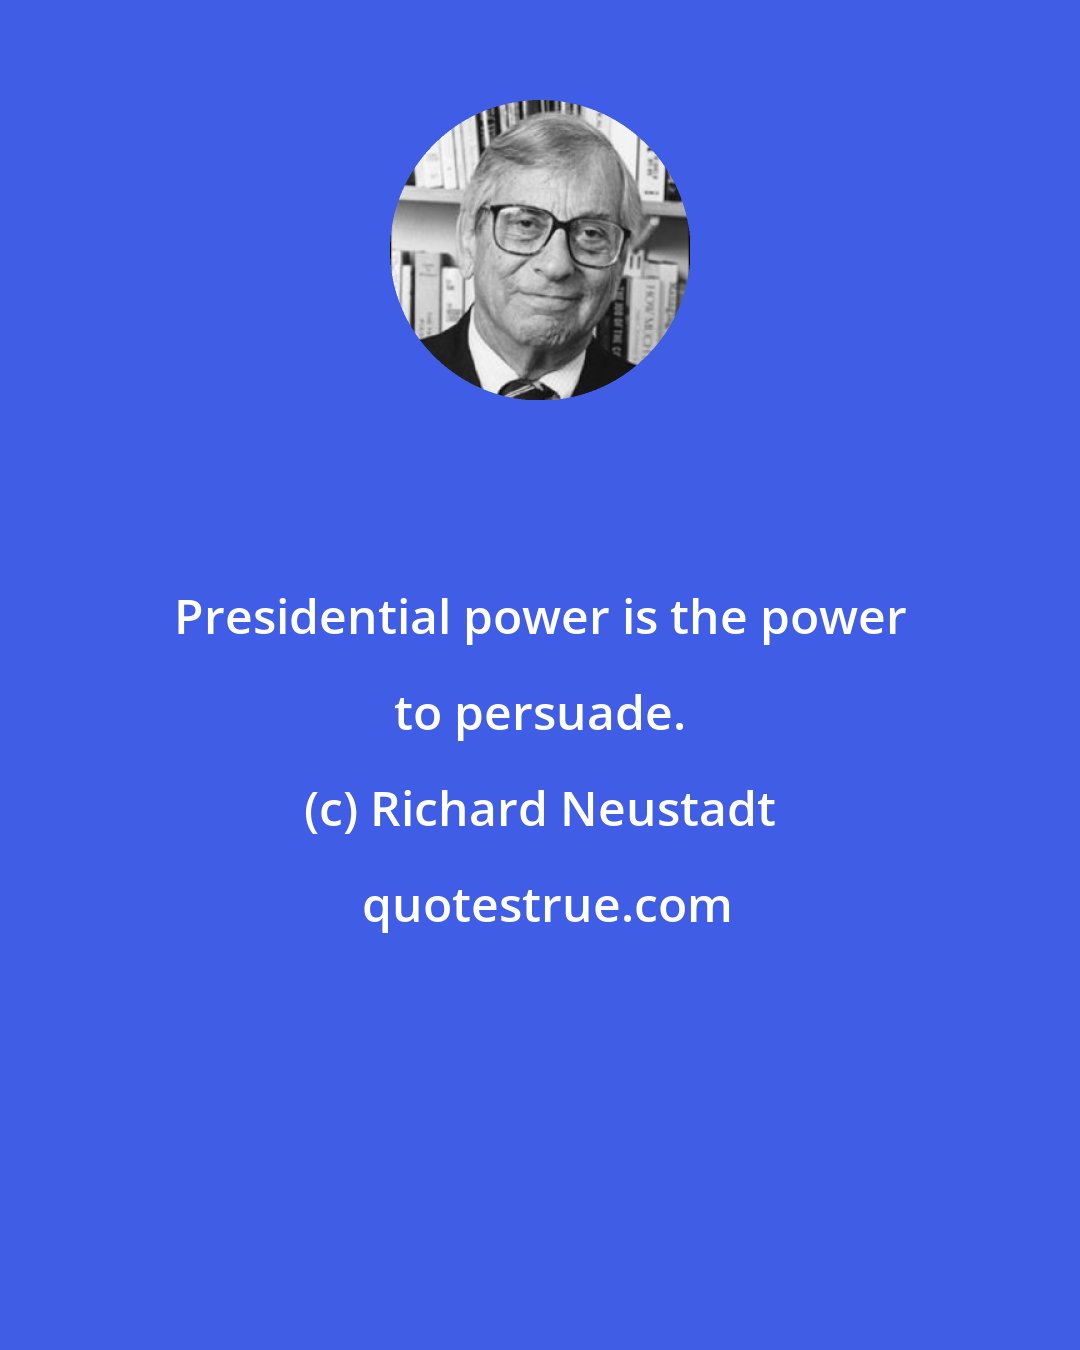 Richard Neustadt: Presidential power is the power to persuade.